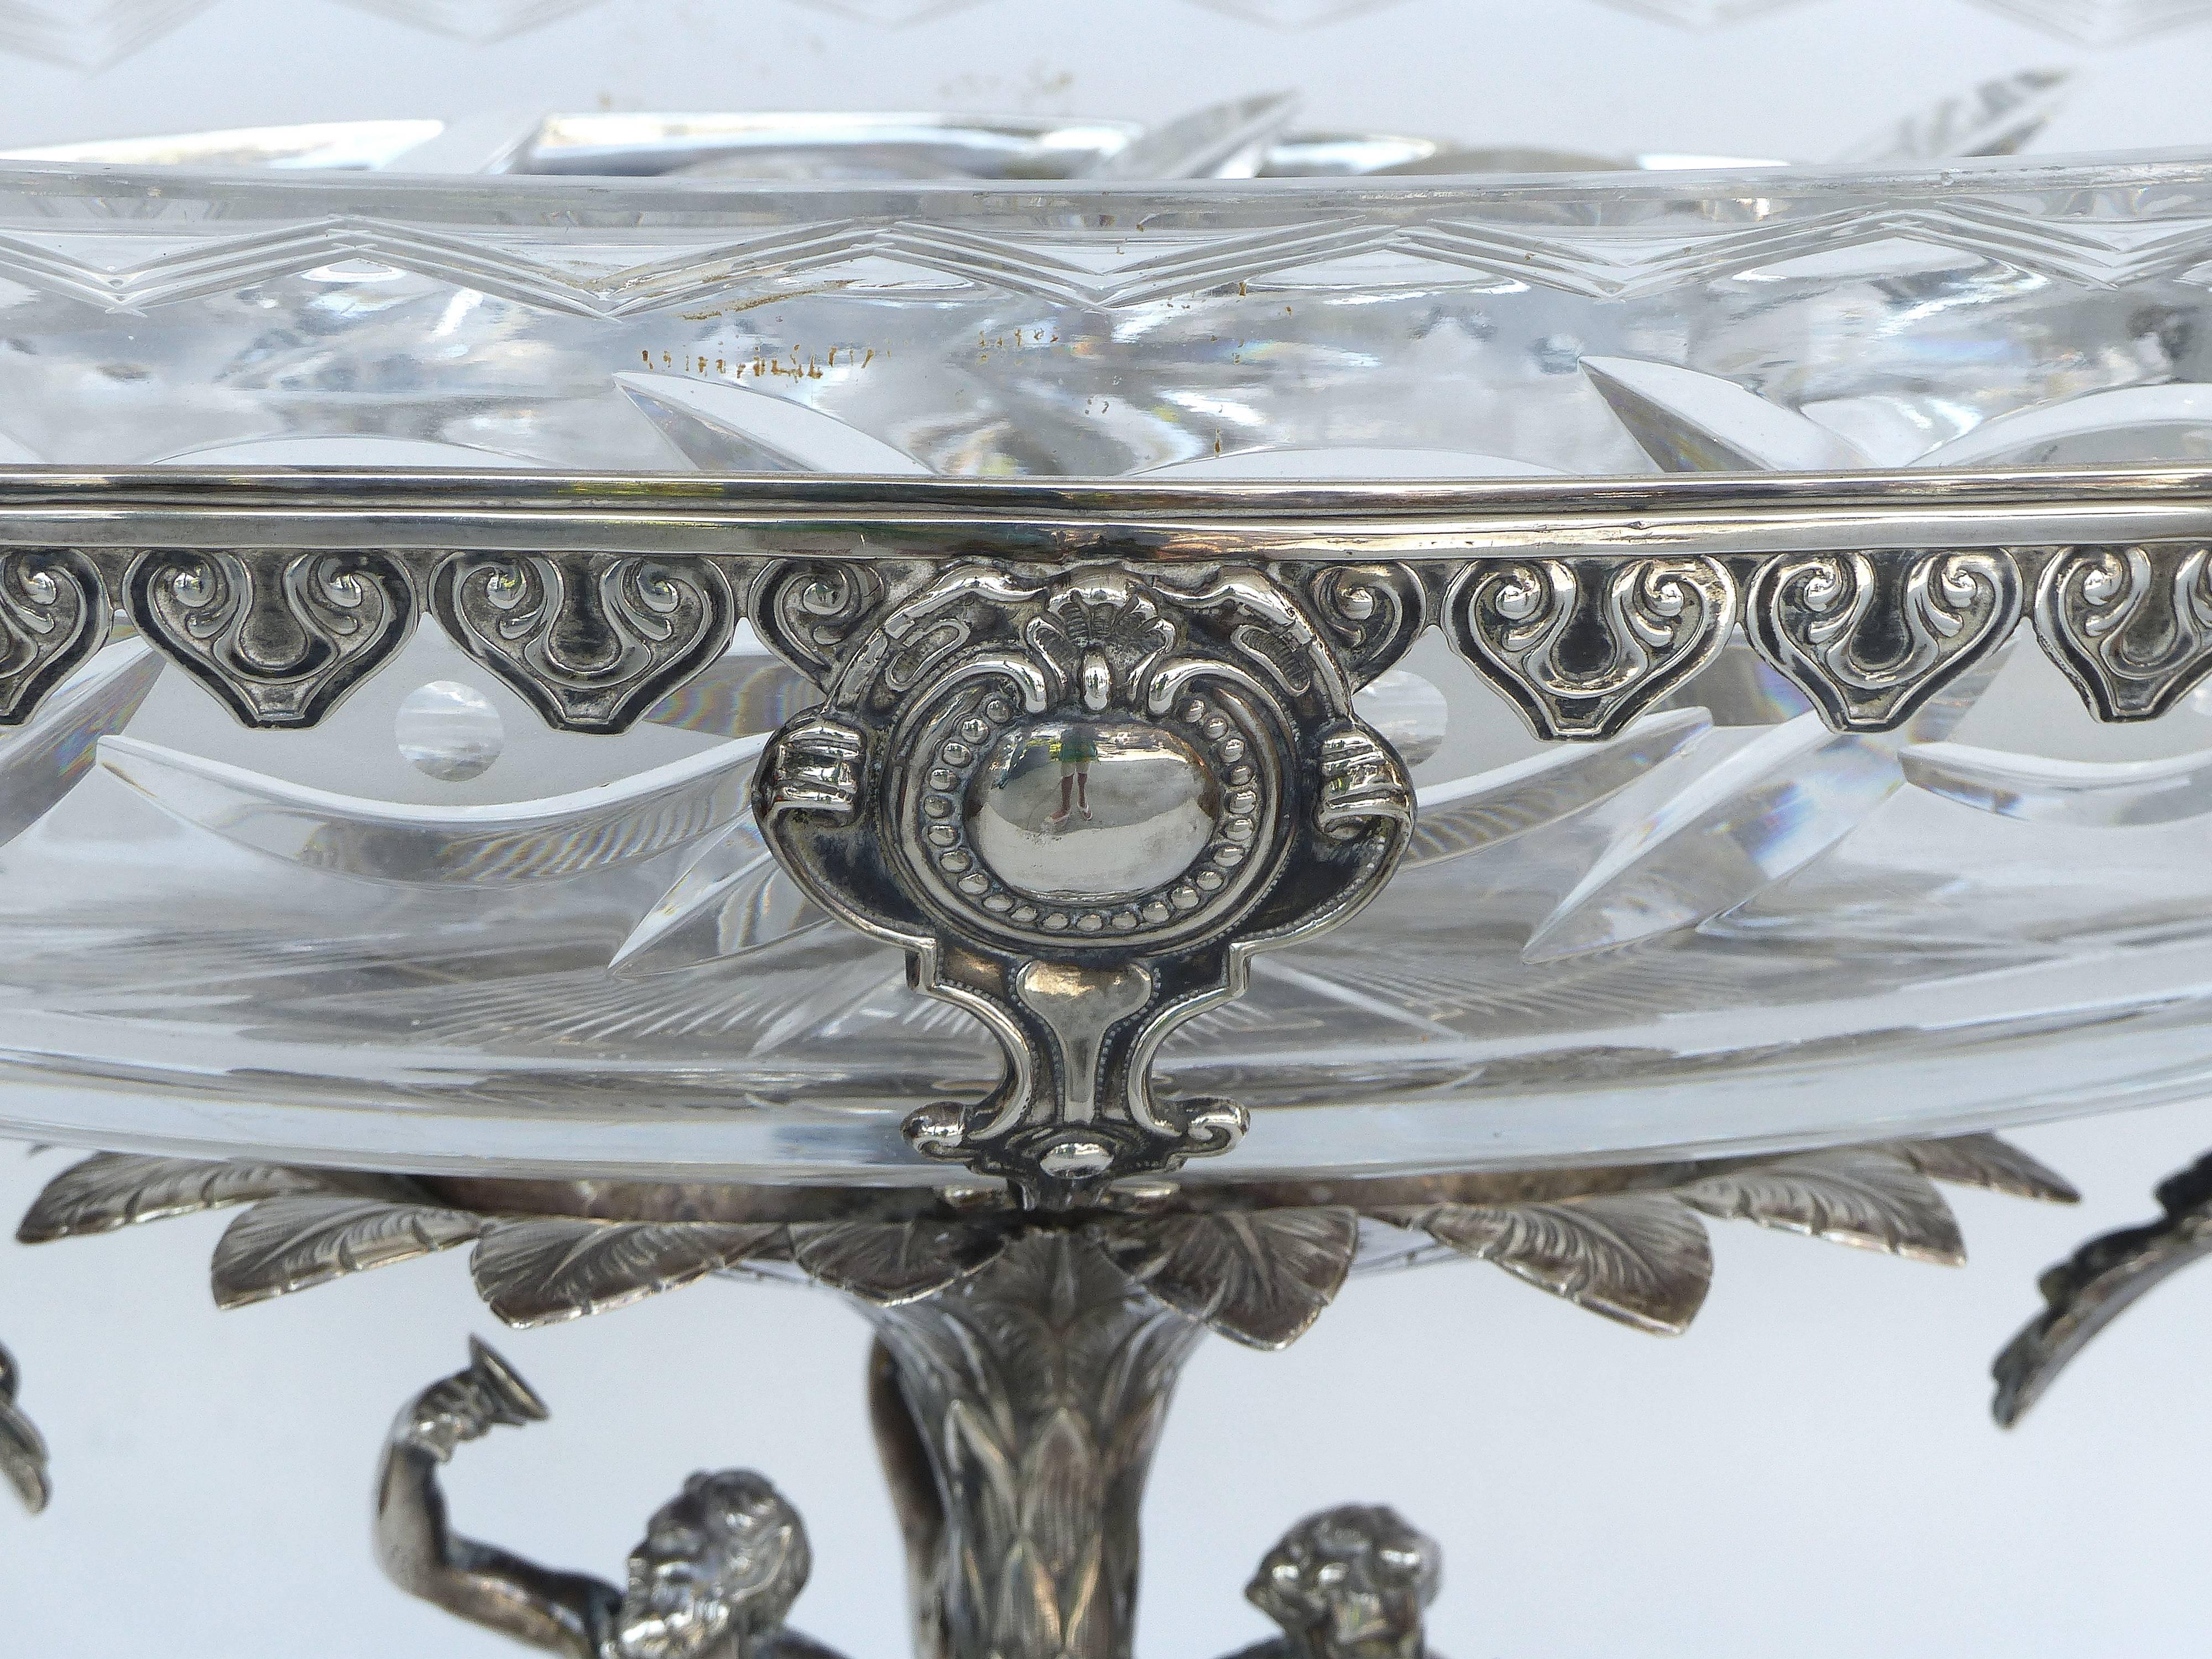 French Mid-19th Century Sterling Silver Centrepiece

Offered for sale in a French mid-19th century sterling silver centerpiece with a hallmark dating to 1840-1870 and a bacchanal theme with figures of a satyr. The cut crystal bowl is chipped and may